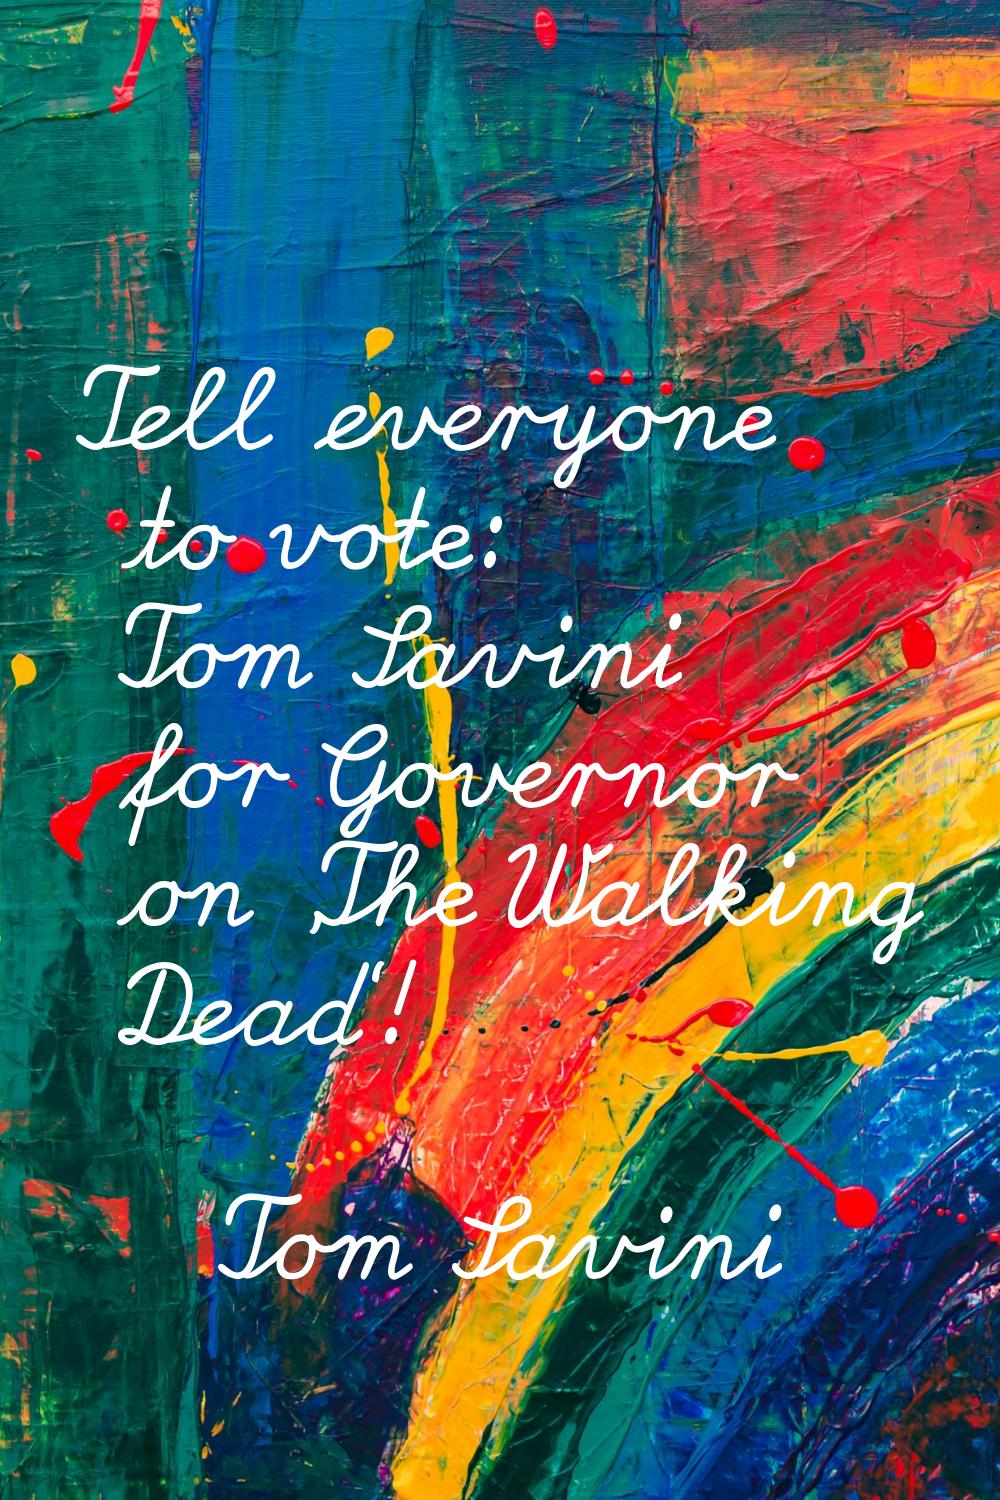 Tell everyone to vote: Tom Savini for Governor on 'The Walking Dead'!